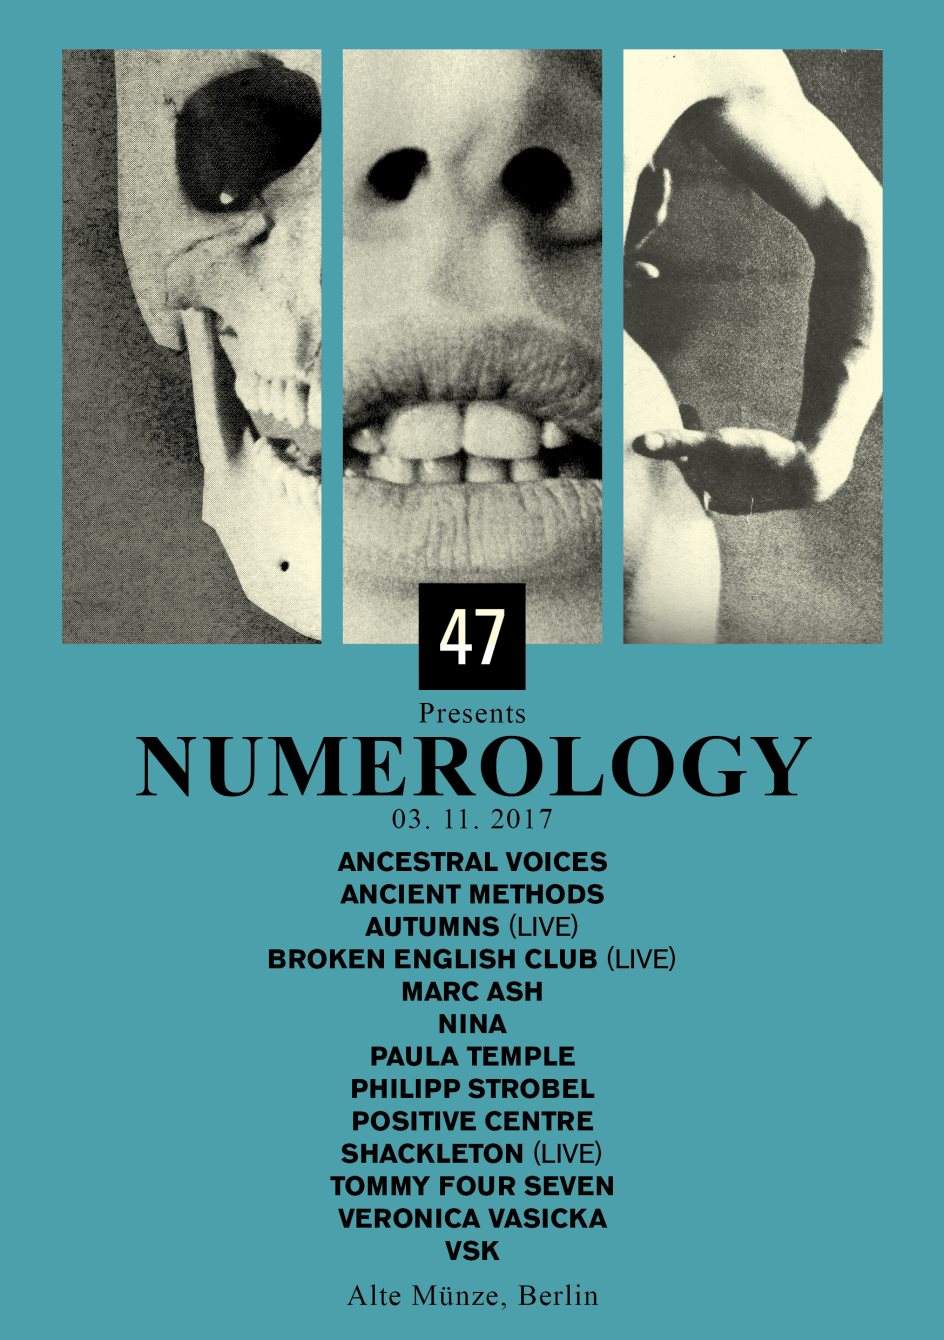 47 presents Numerology: Ancient Methods, Paula Temple, Shackleton, Tommy Four Seven & More - Página trasera